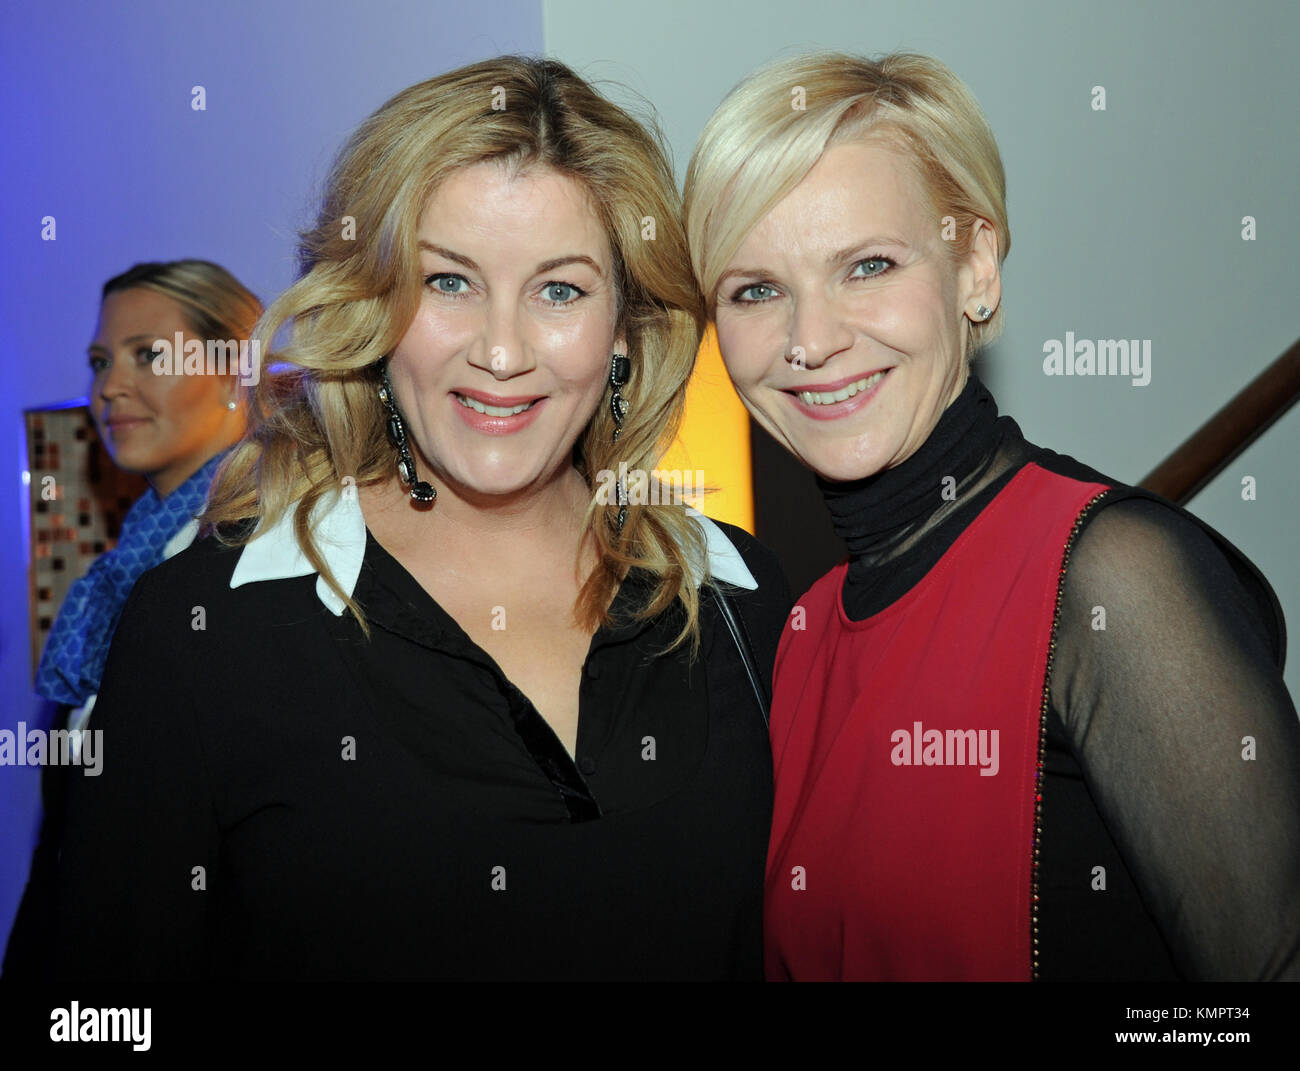 The actresses Alexa Maria Surholt (L) and Andrea Kathrin Loewig are guests at the traditional Advent meal ARD at the Bayerischer Hof in Munich, Germany, 08 Germany 2017. Photo: Ursula Düren/dpa Stock Photo